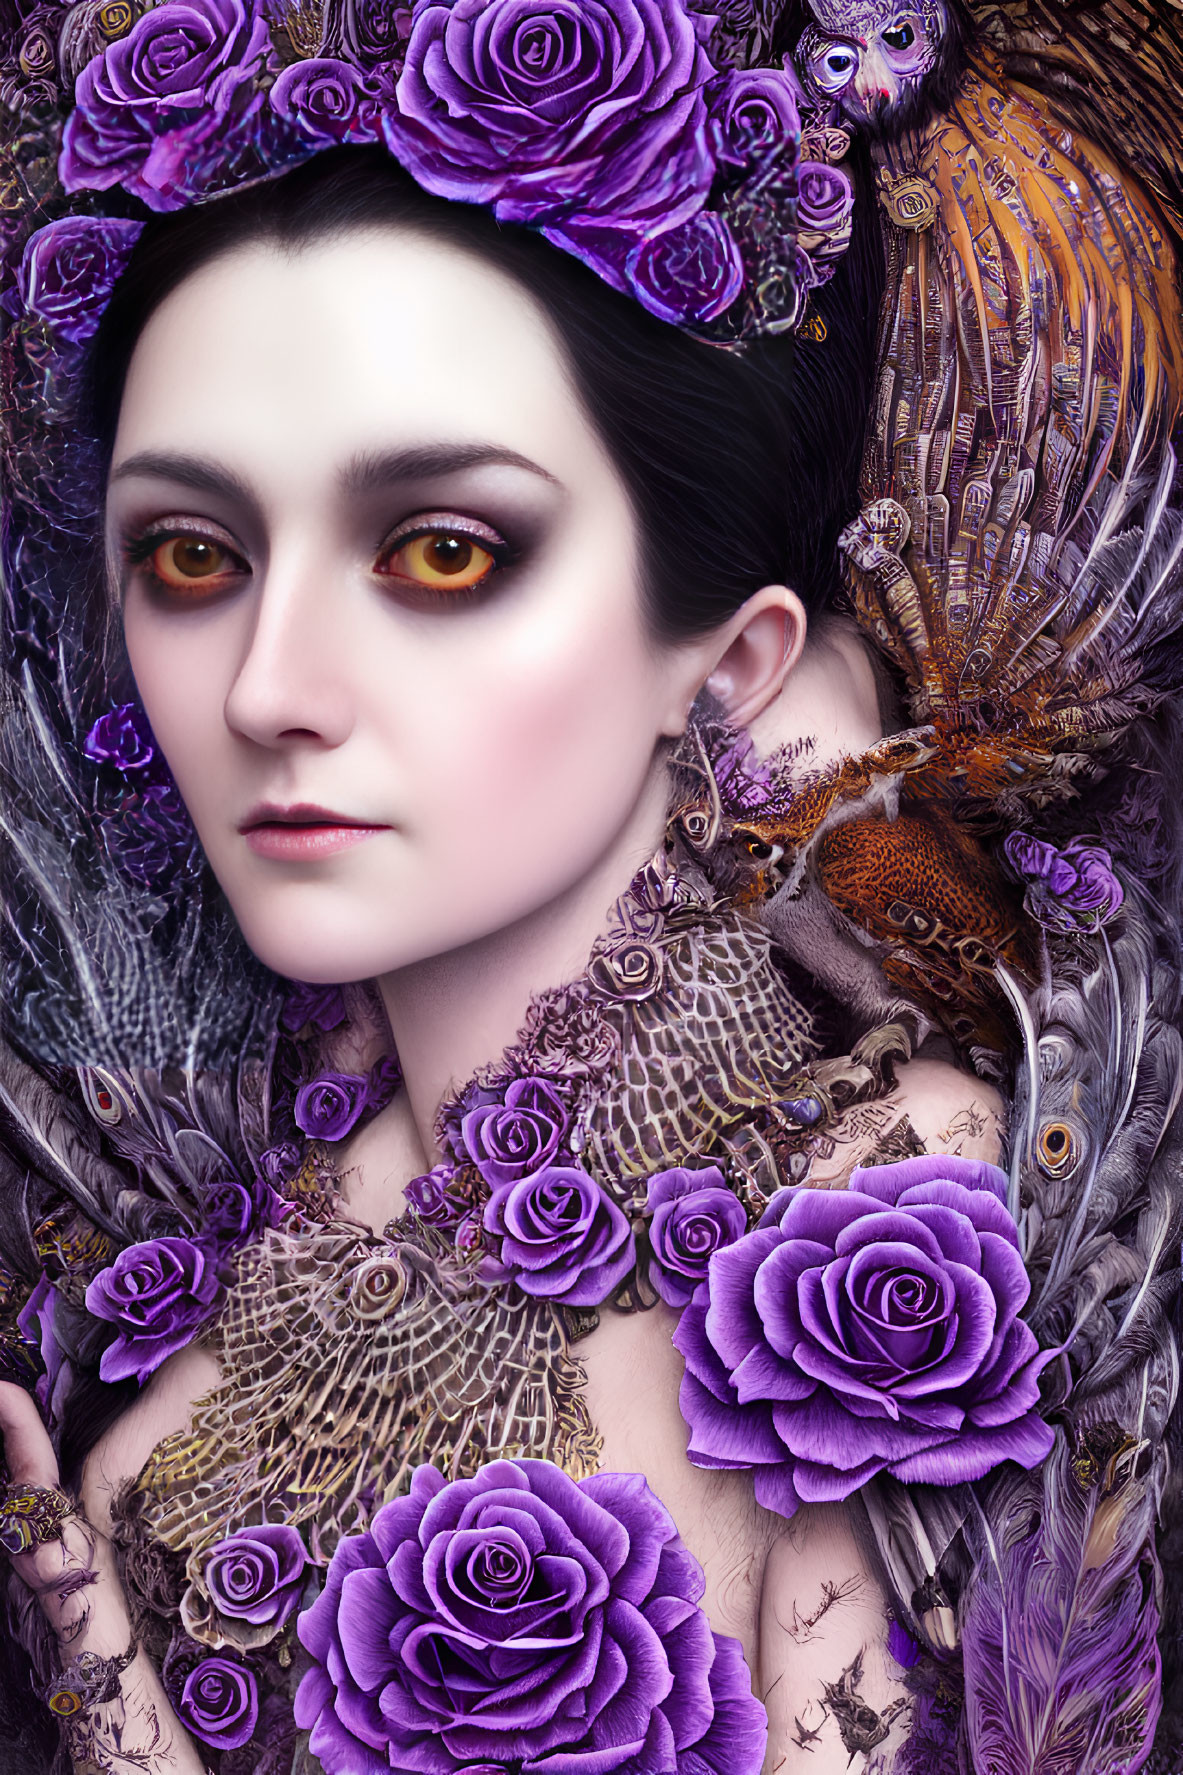 Portrait of a woman with purple roses, golden eyes, and ornate feathered details